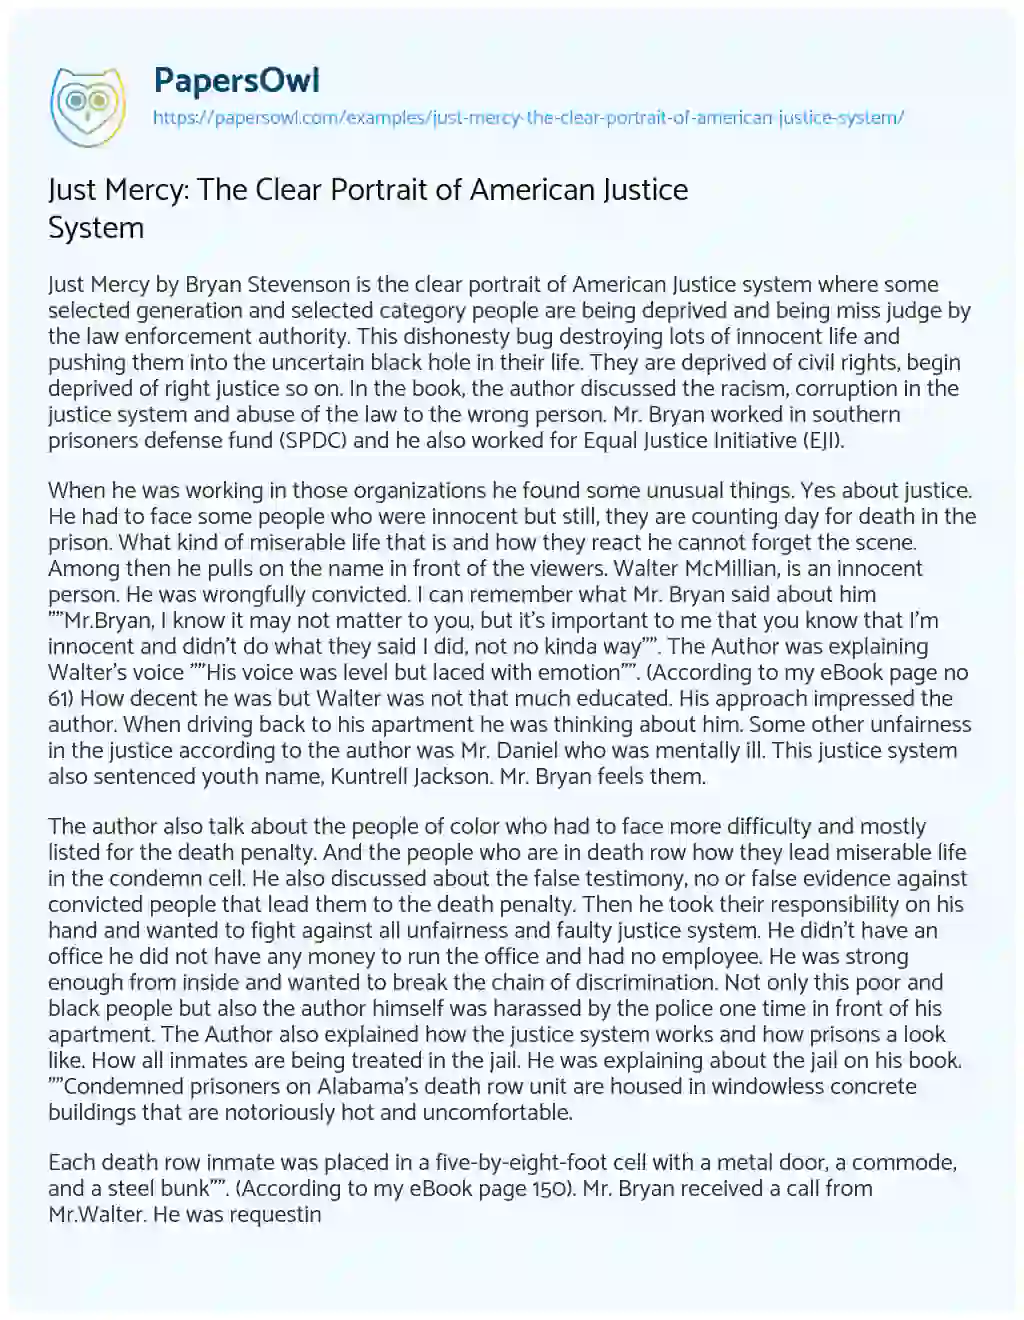 Essay on Just Mercy: the Clear Portrait of American Justice System